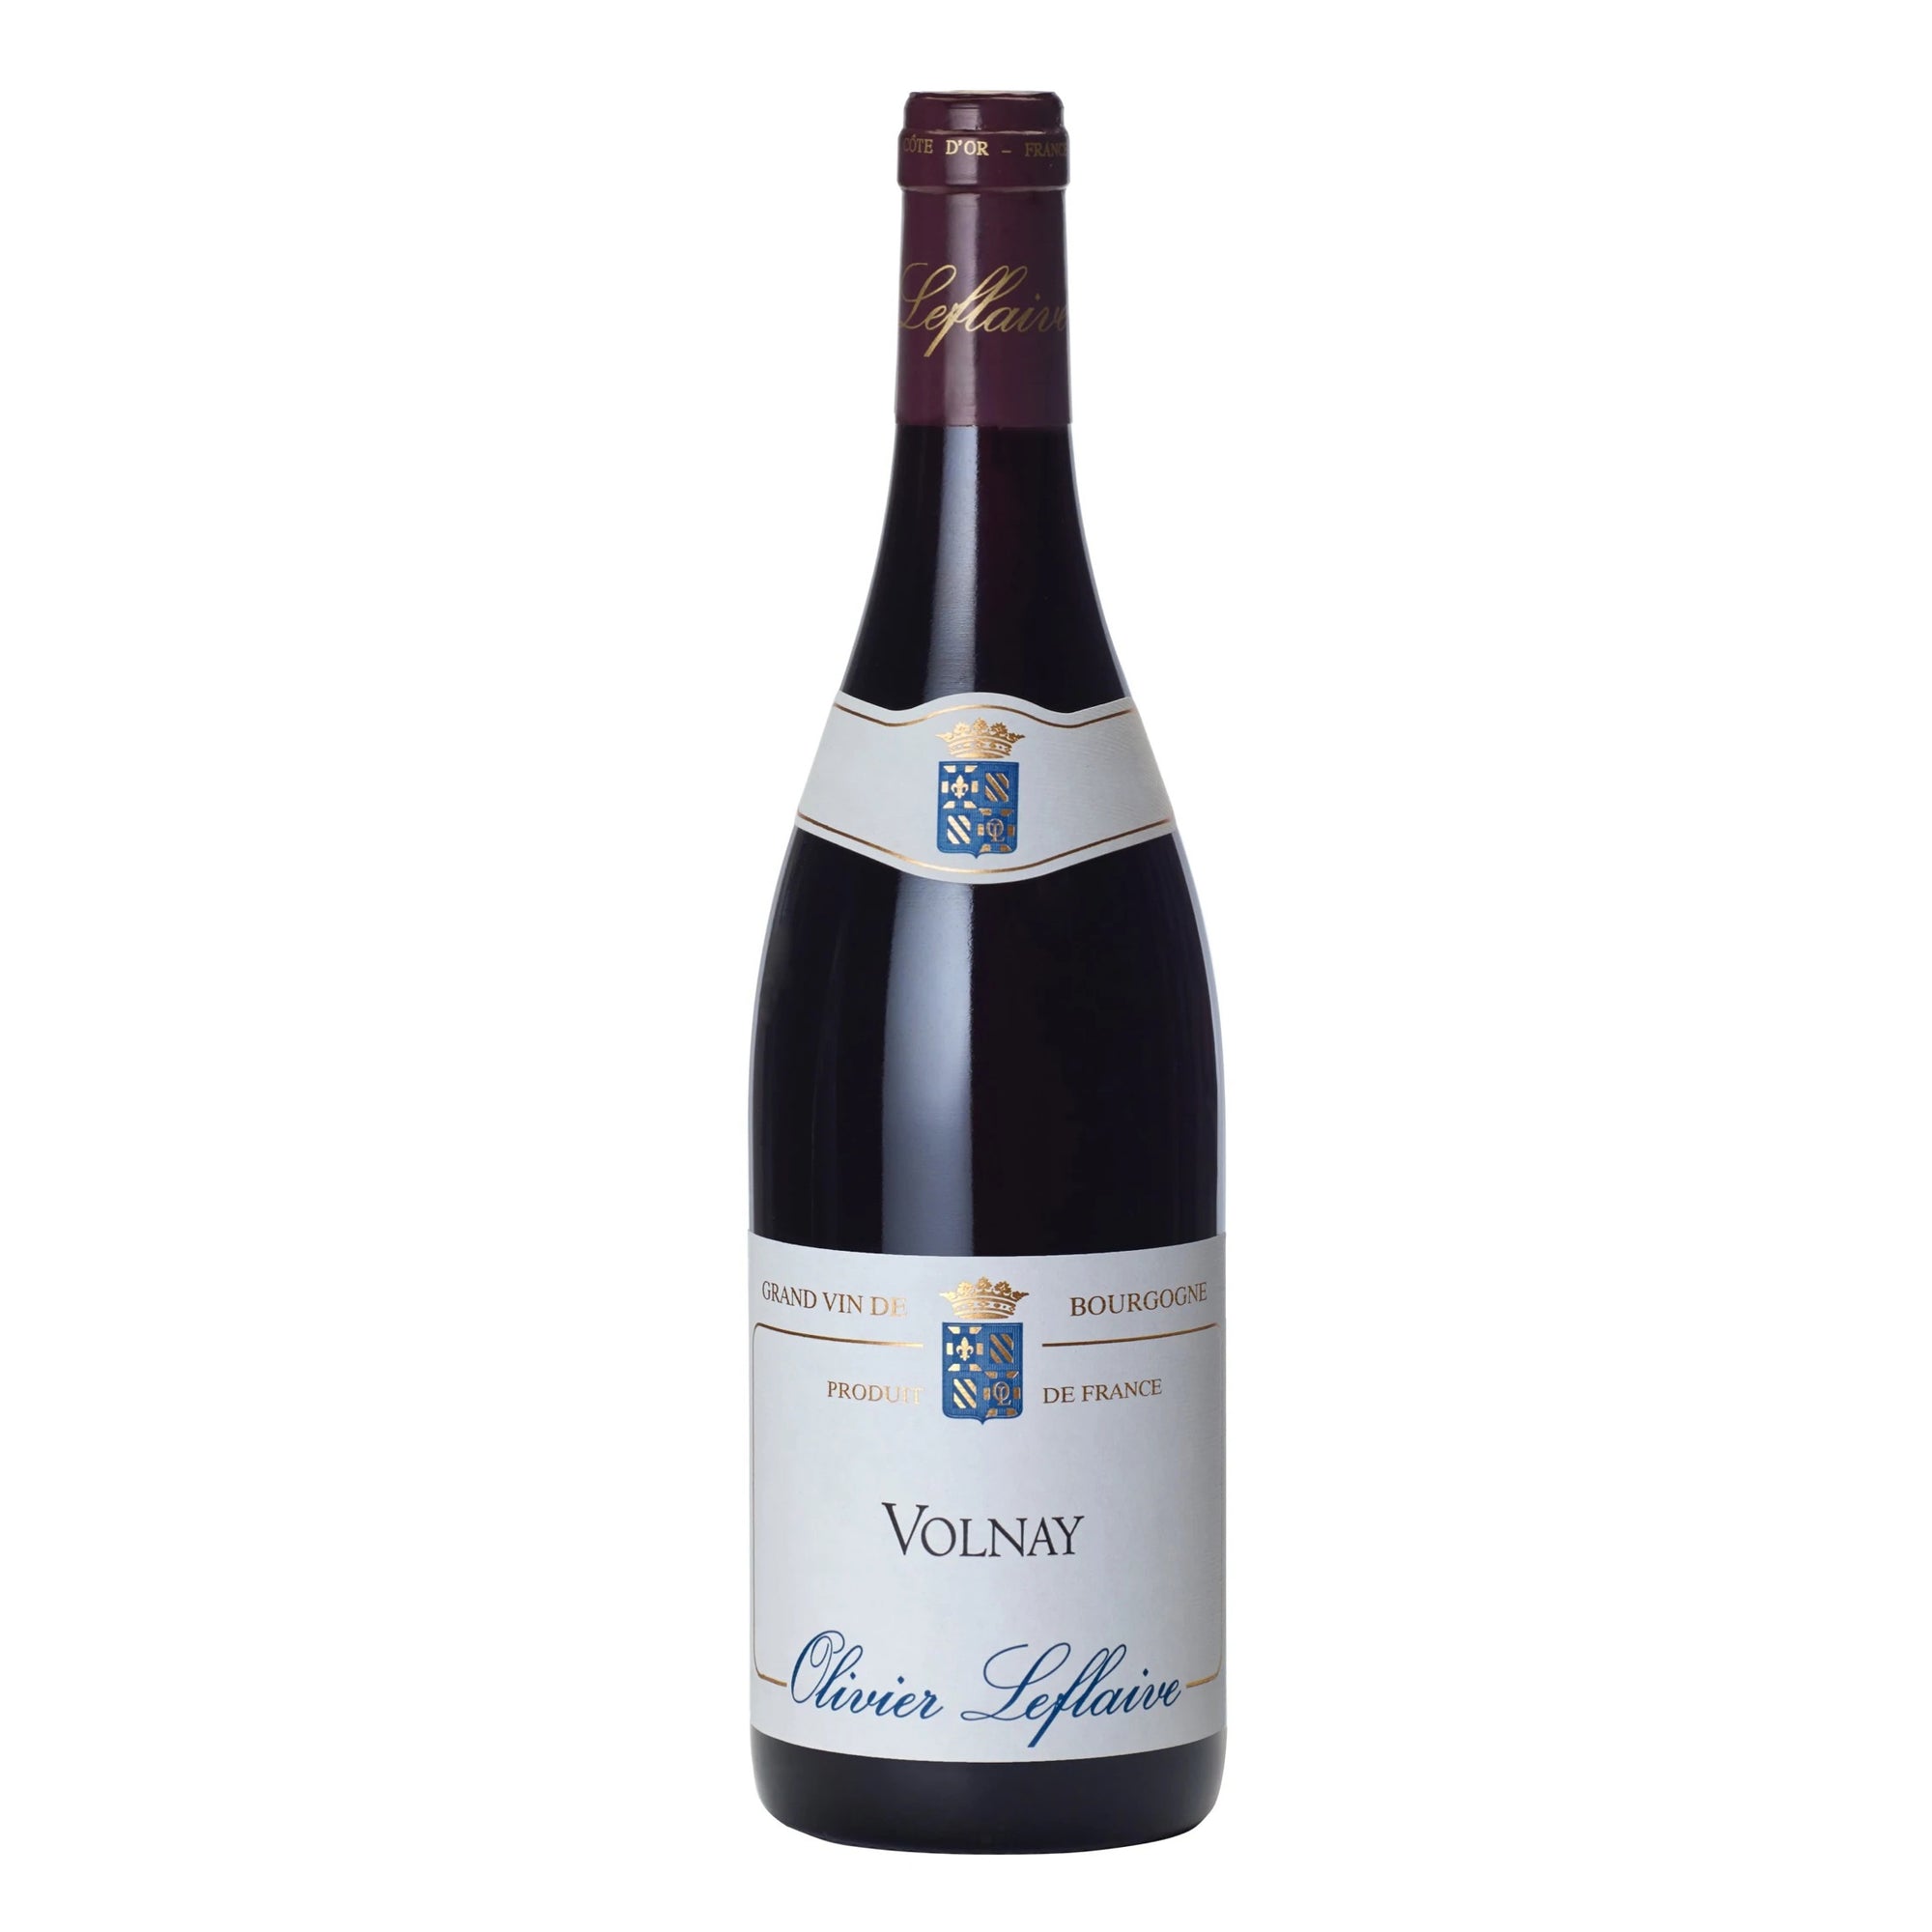 OLIVIER LEFLAIVE Volnay 2018